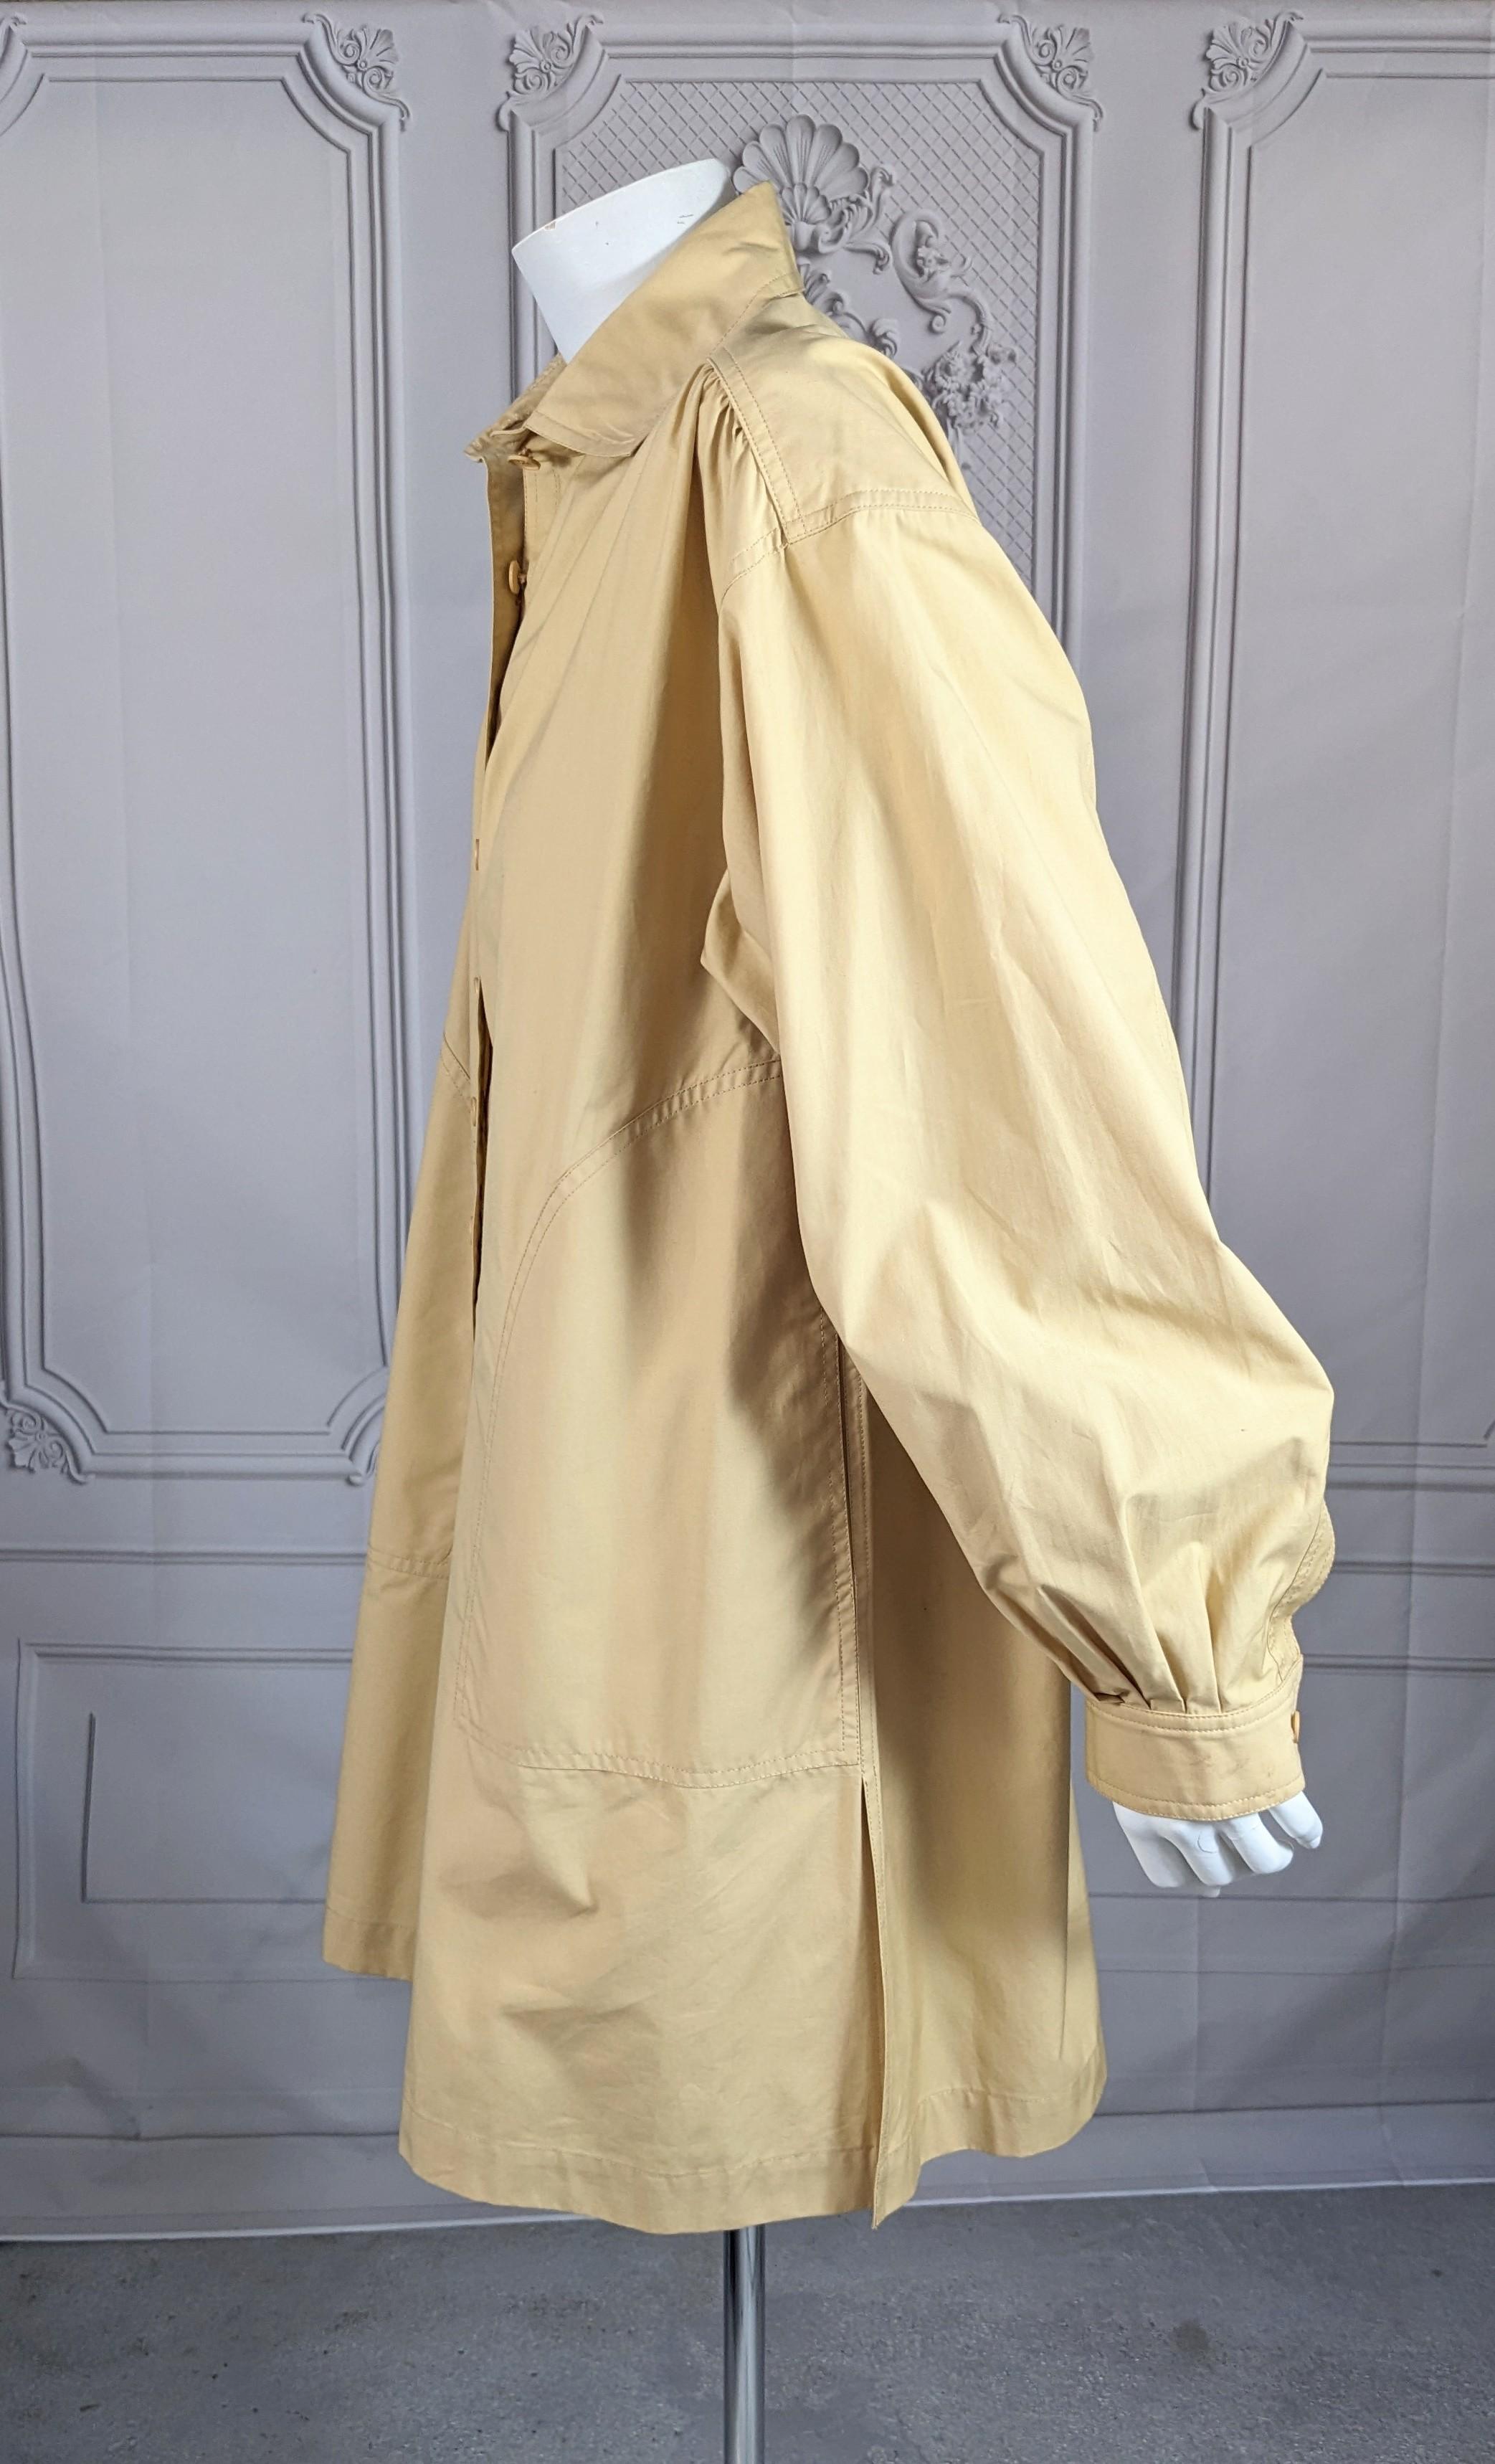 Iconic Yves Saint Laurent Rive Gauche Saharienne Ensemble In Excellent Condition For Sale In New York, NY